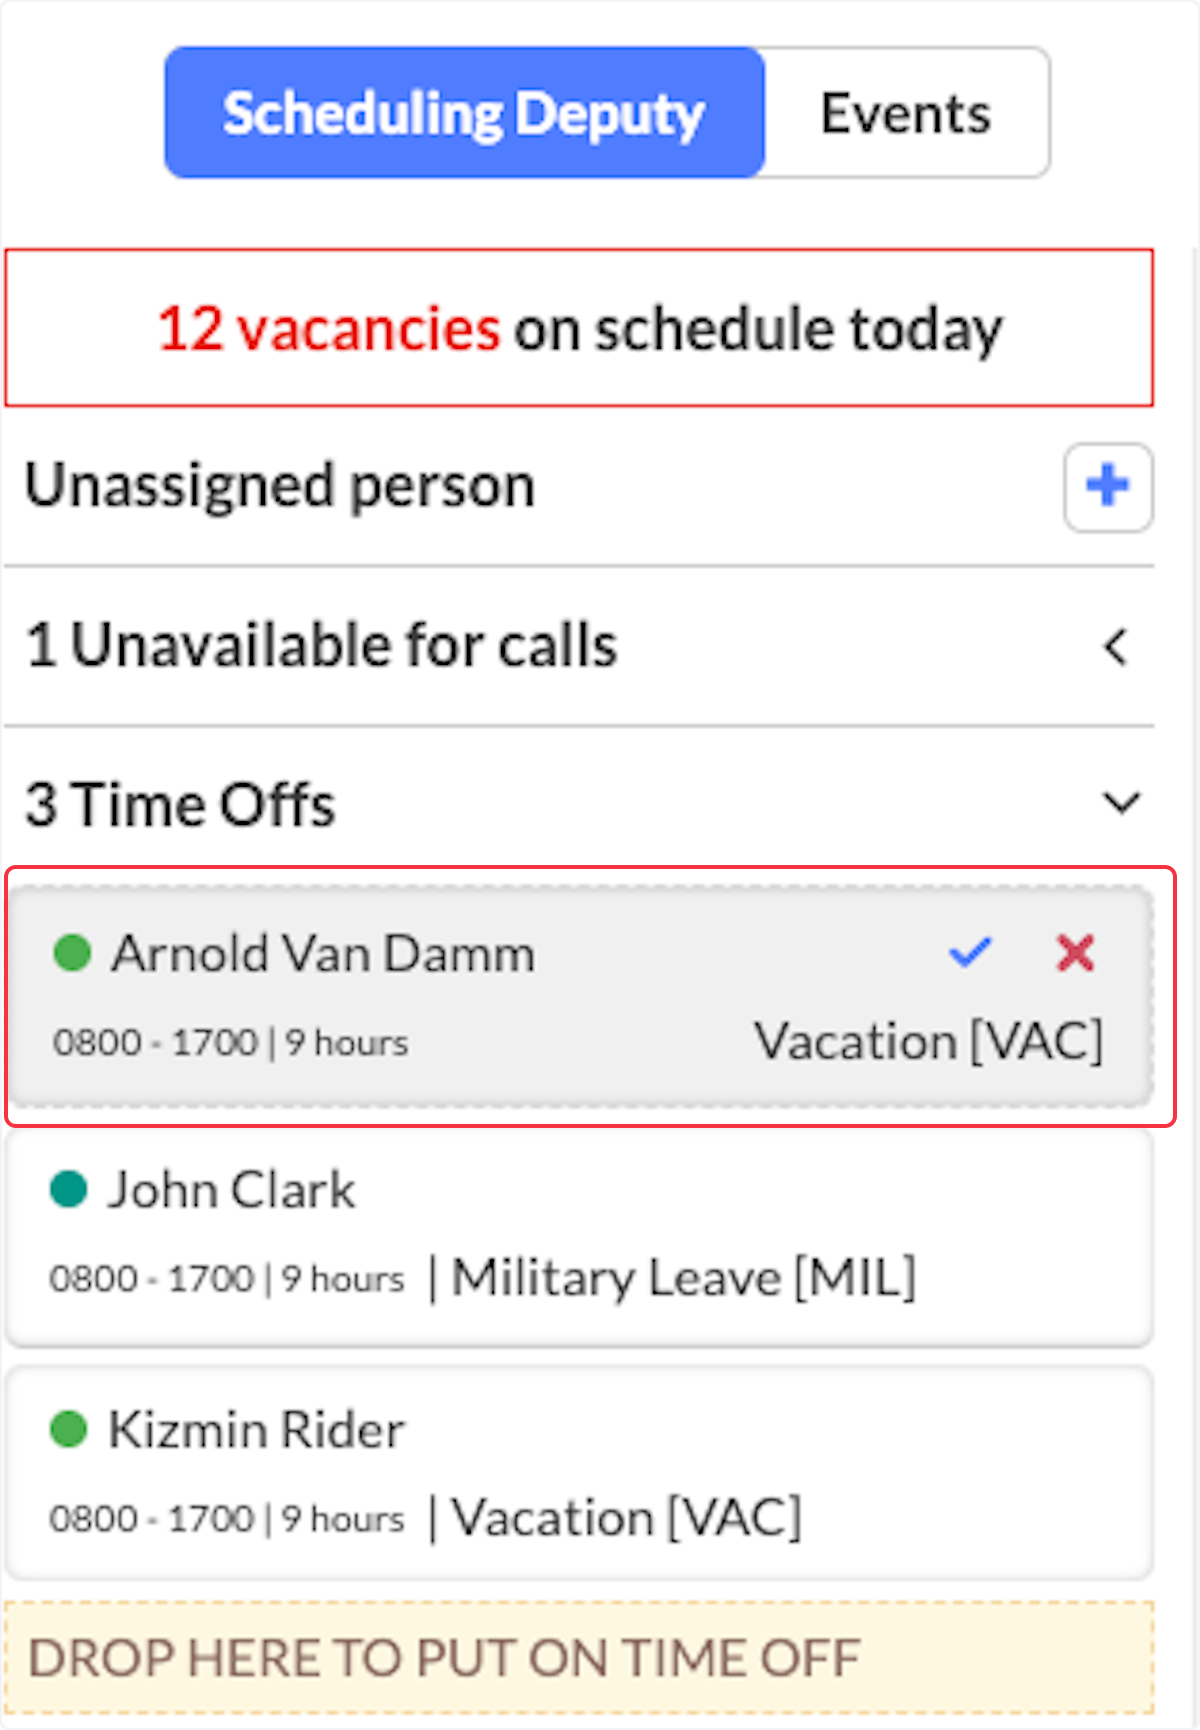 In the Scheduling Deputy you can find approved Time Offs, as well as Time Off Requests that have been sent to you for approval. 